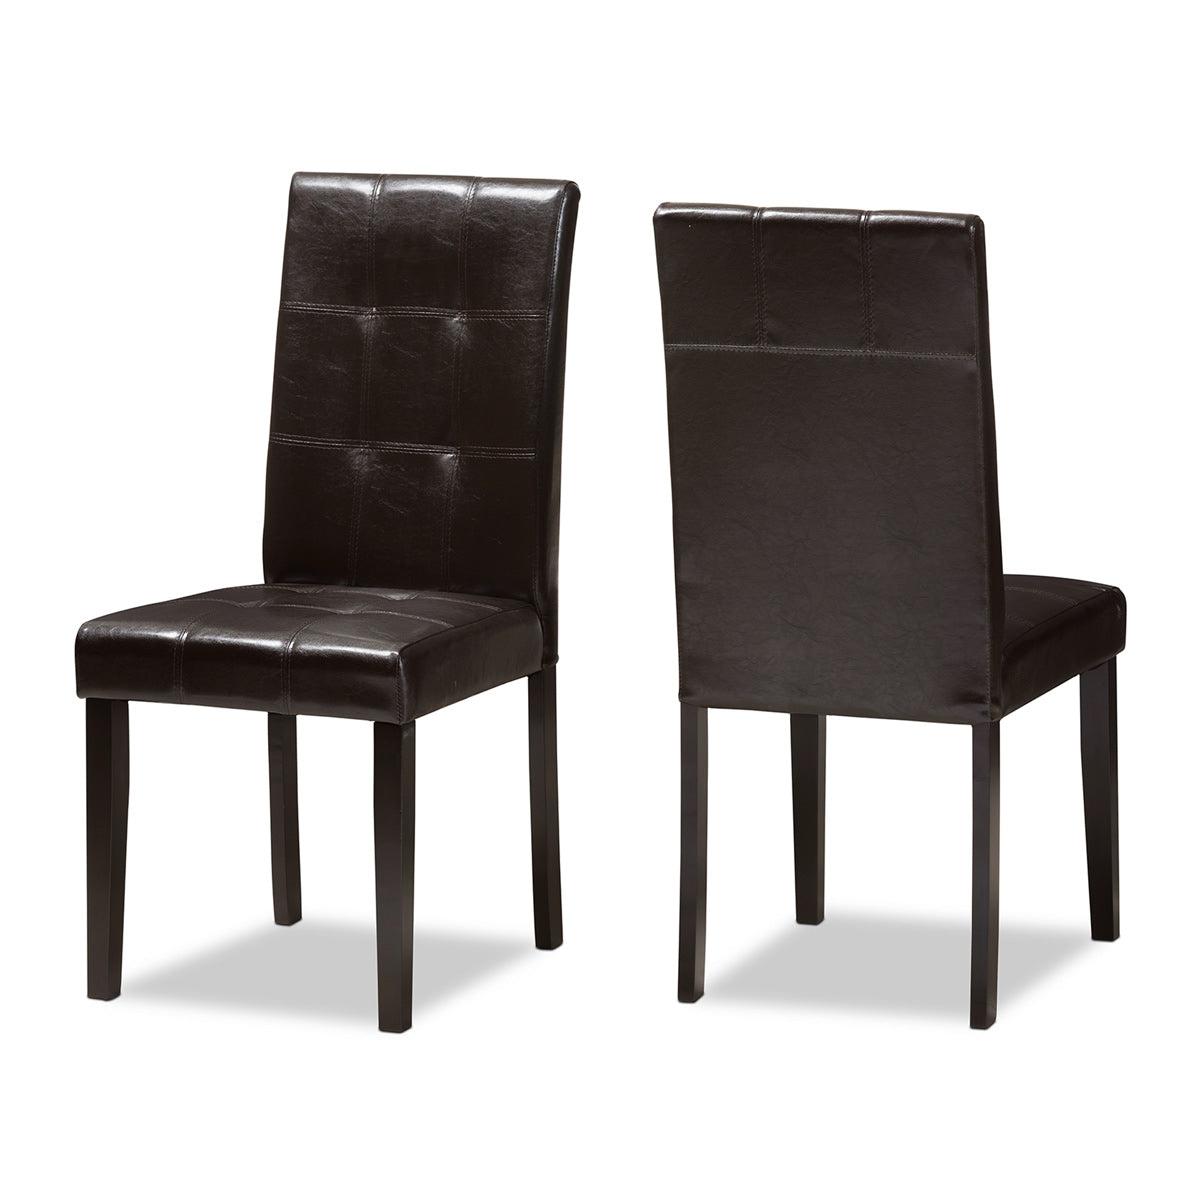 Baxton Studio Avery Modern and Contemporary Dark Brown Faux Leather Upholstered Dining Chair (Set of 2) Baxton Studio-dining chair-Minimal And Modern - 1